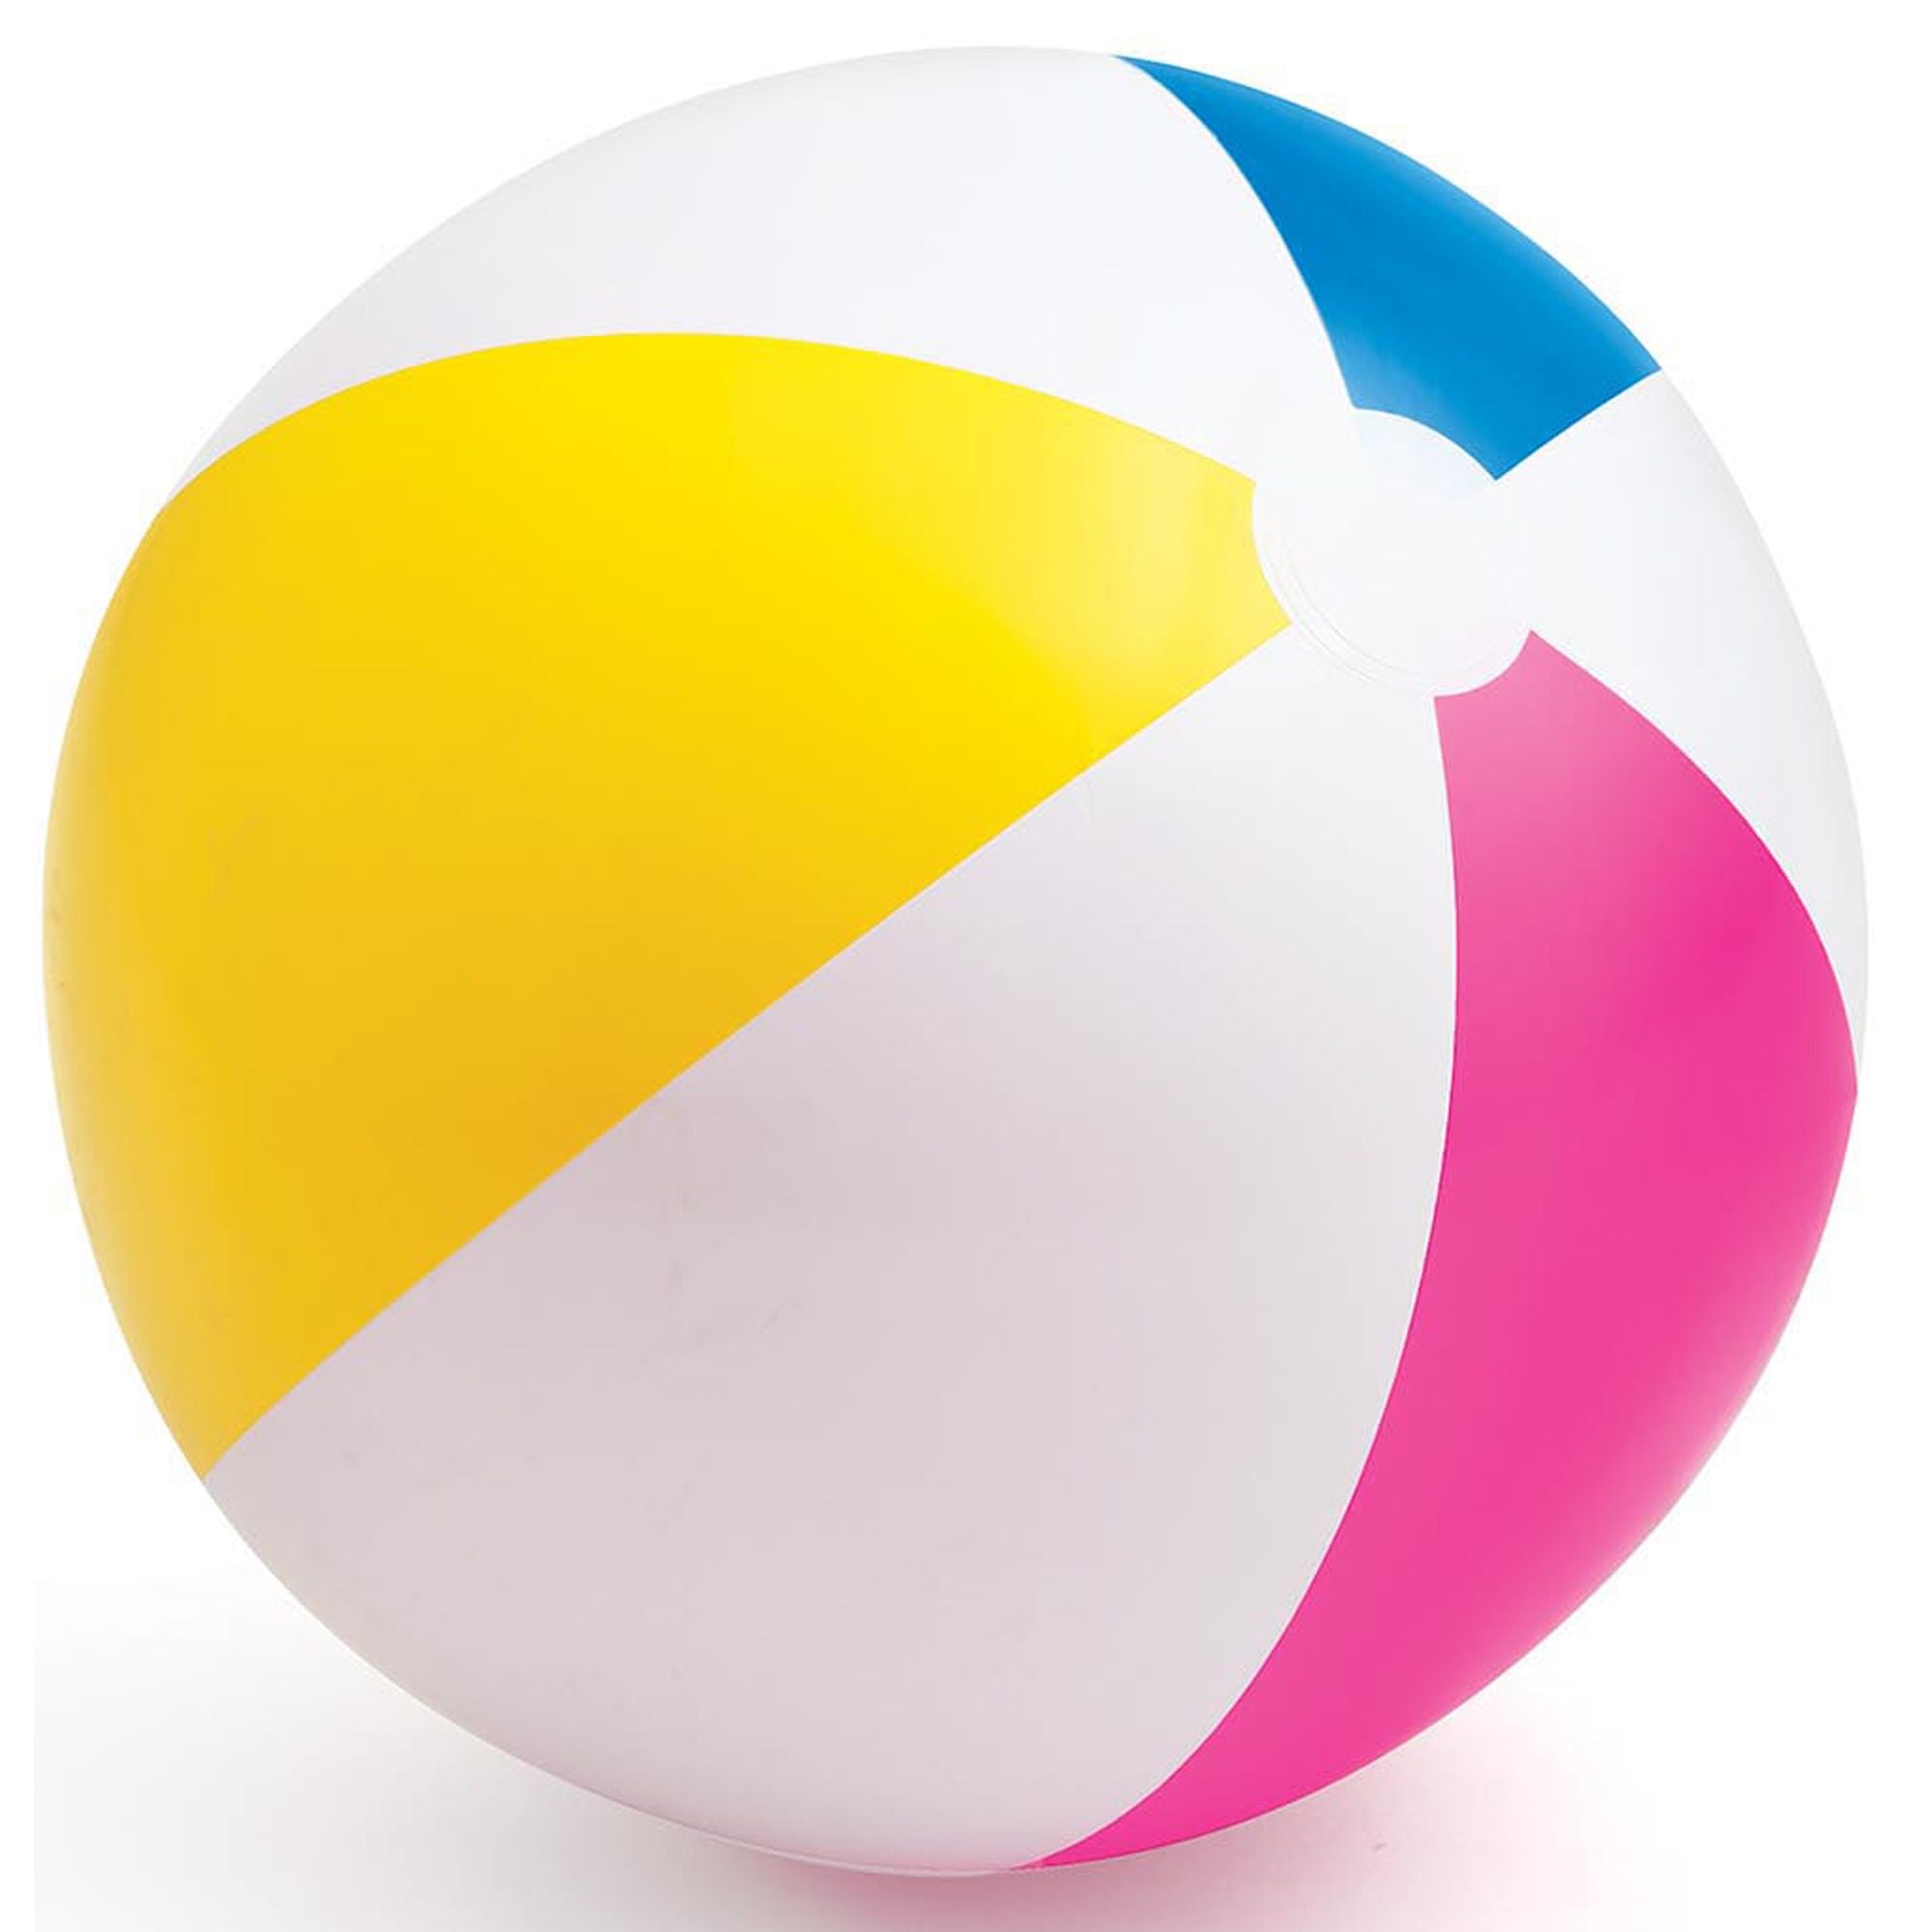 Intex 24' Glossy Panel Beach Ball (Pack of 3) - Perfect for the Bea